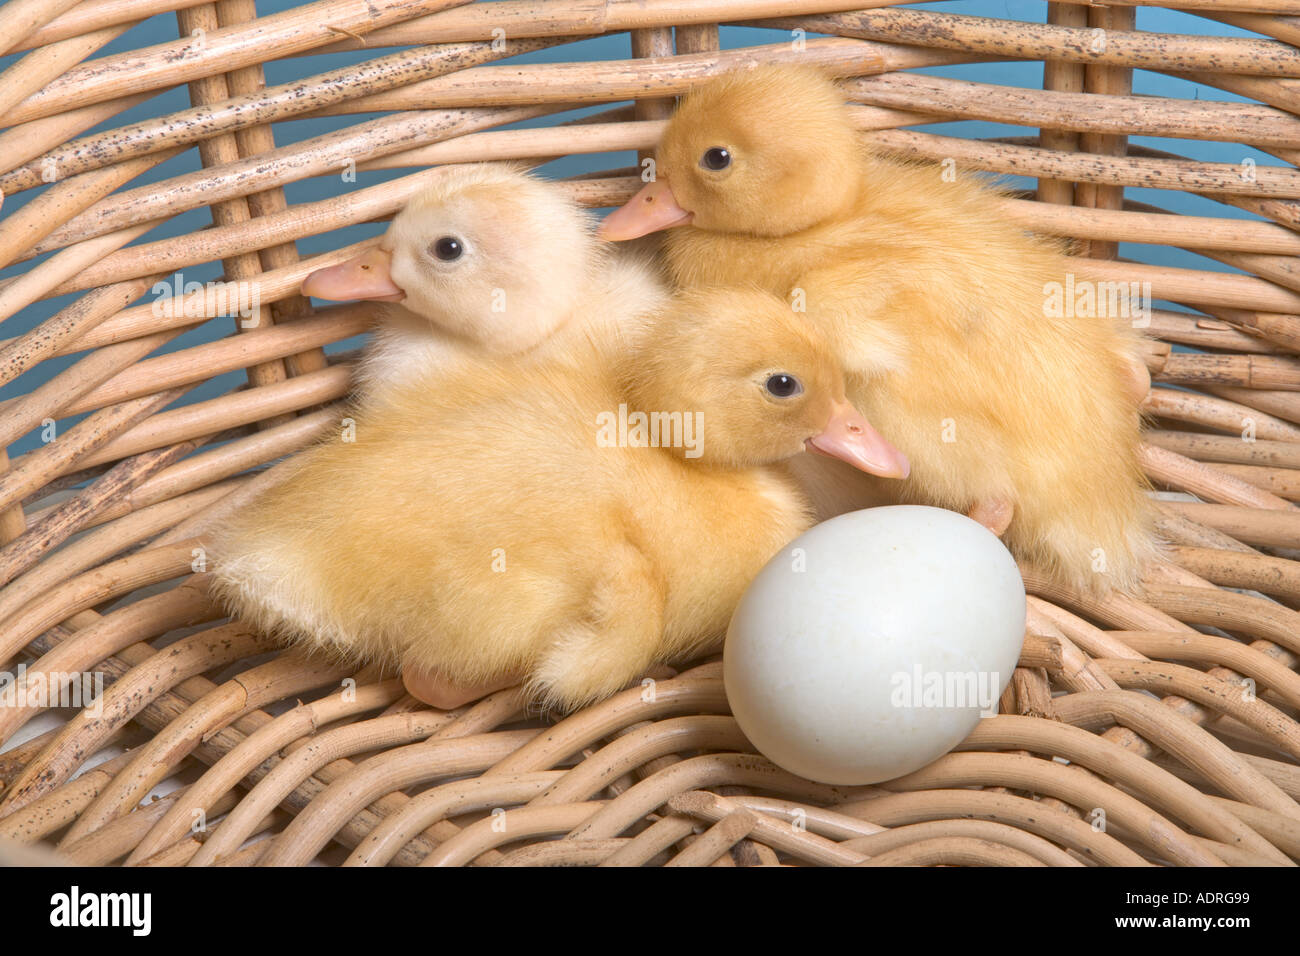 Newly hatched Ducklings with one unhatched Egg Stock Photo